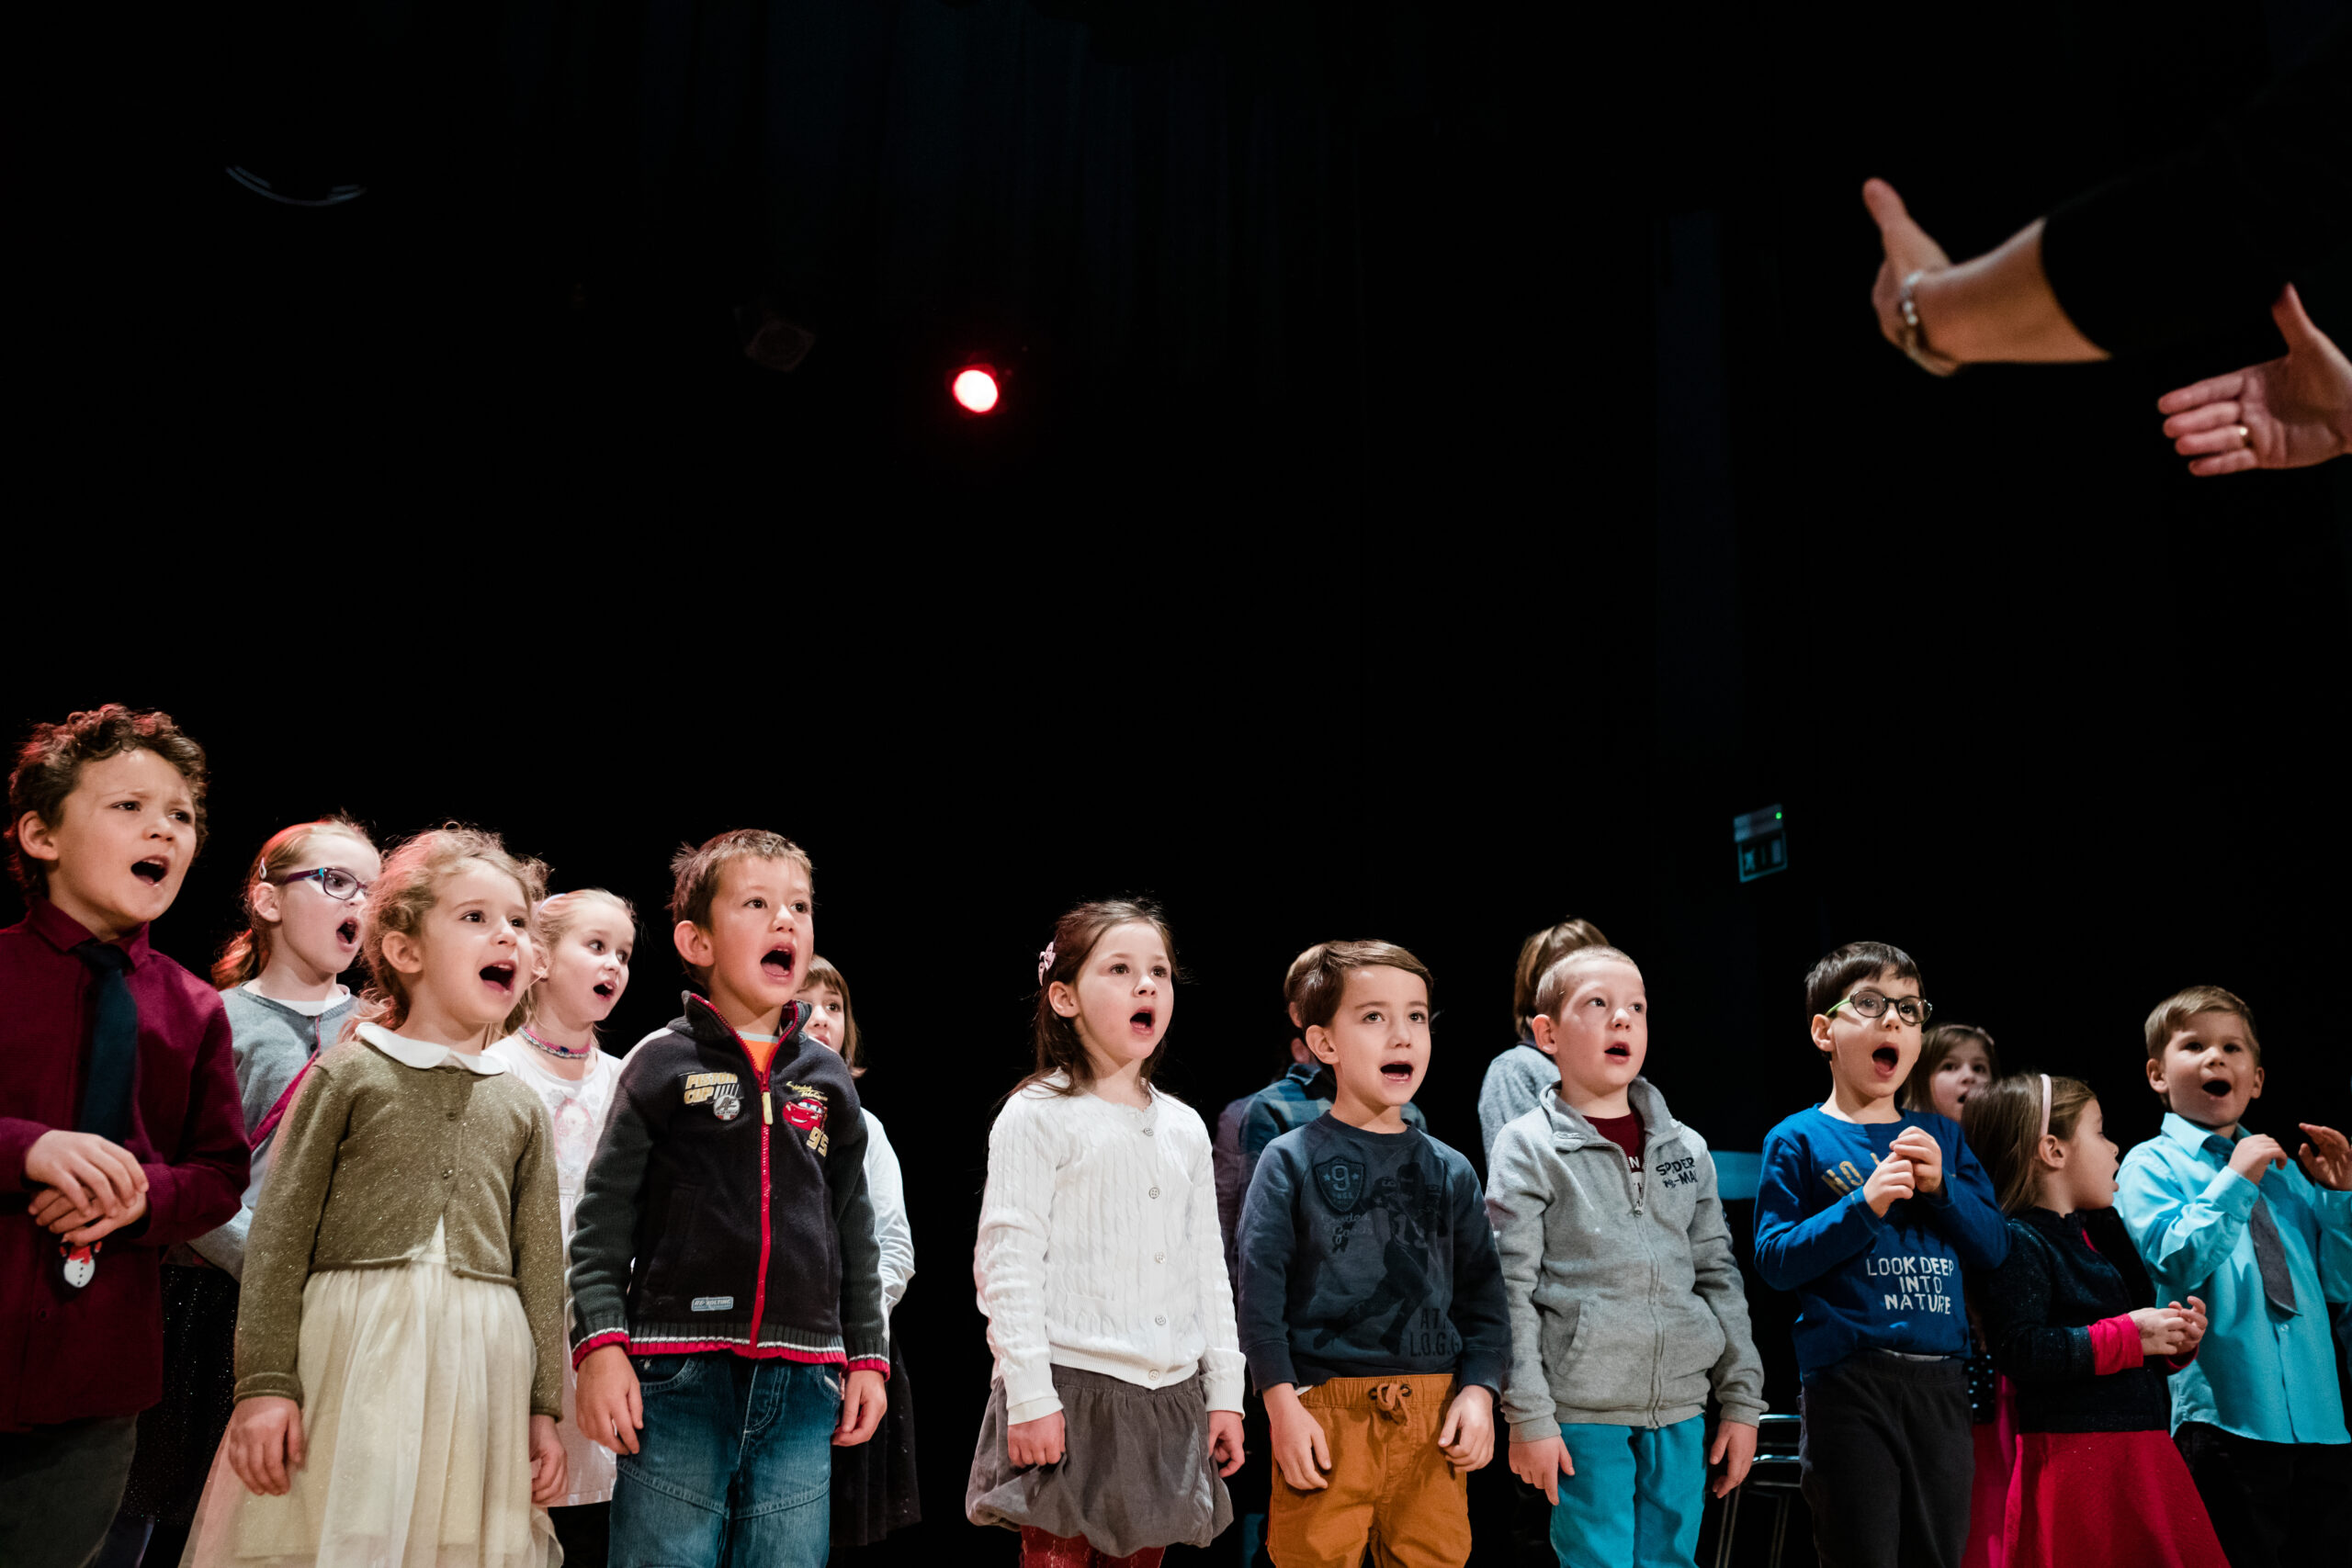 Polona Avanzo, Slovenia: We Have Been Singing From a Young Age, 2019, Children’s Choir of Zvočna zgodba (Sound Story) Music Centre, Slovenia -Never ever ask a child who likes singing to pretend to just open their mouth! The expression of emotion through singing brings a shared experience, connection, development of emotional and imaginary world and a tool for speech development.